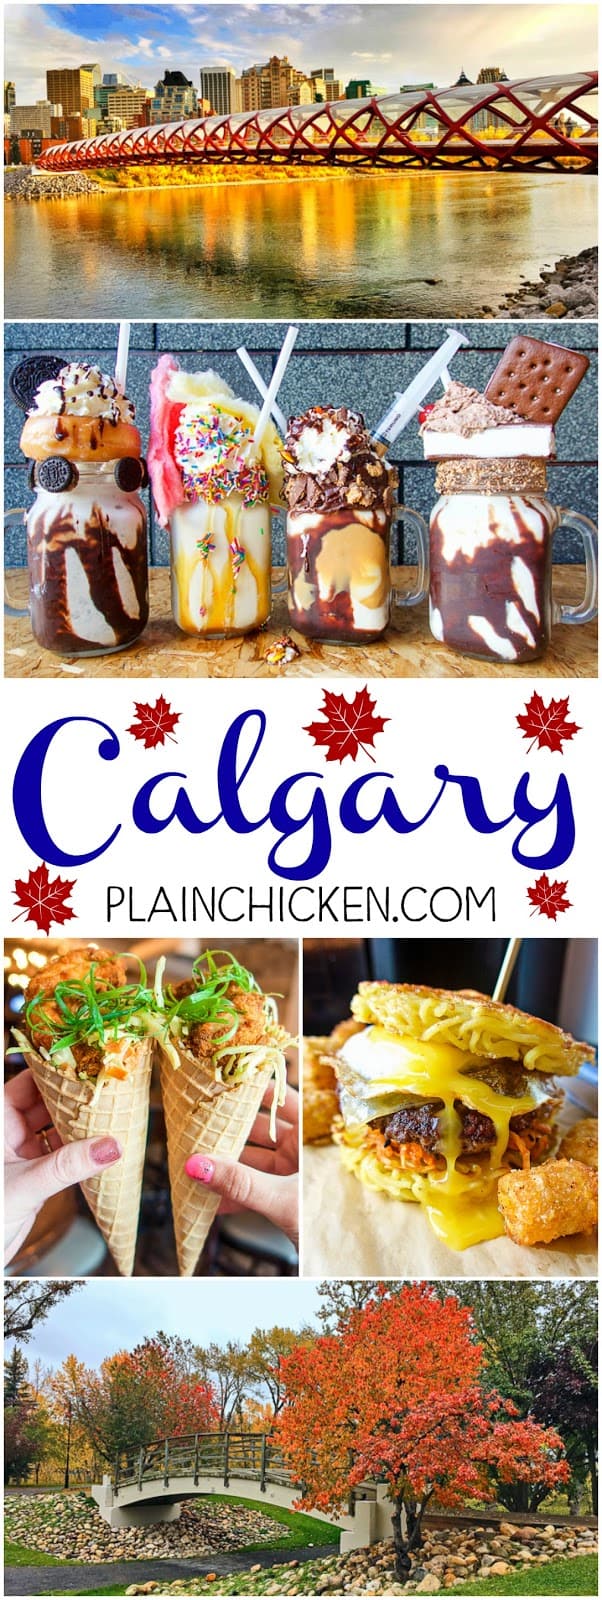 Calgary, AB Canada - where to stay, what to do and where to eat! The BEST burgers, crazy milkshakes and ice cream. Also the best spot to watch the sunset.